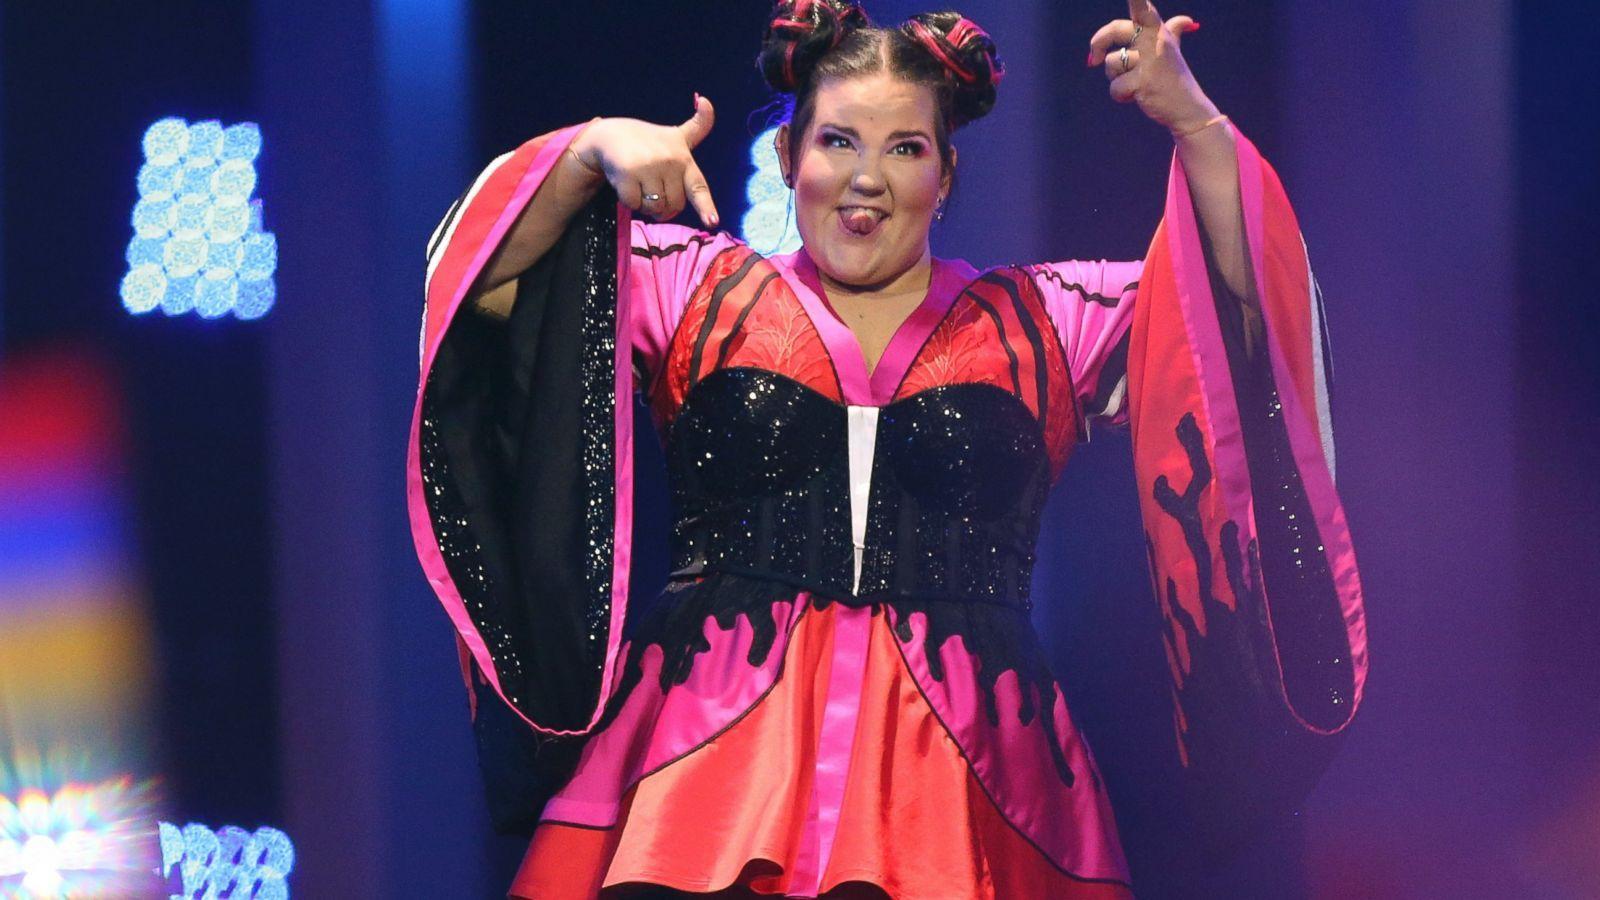 Netta Barzilai wins 2018 Eurovision Song Contest for Israel